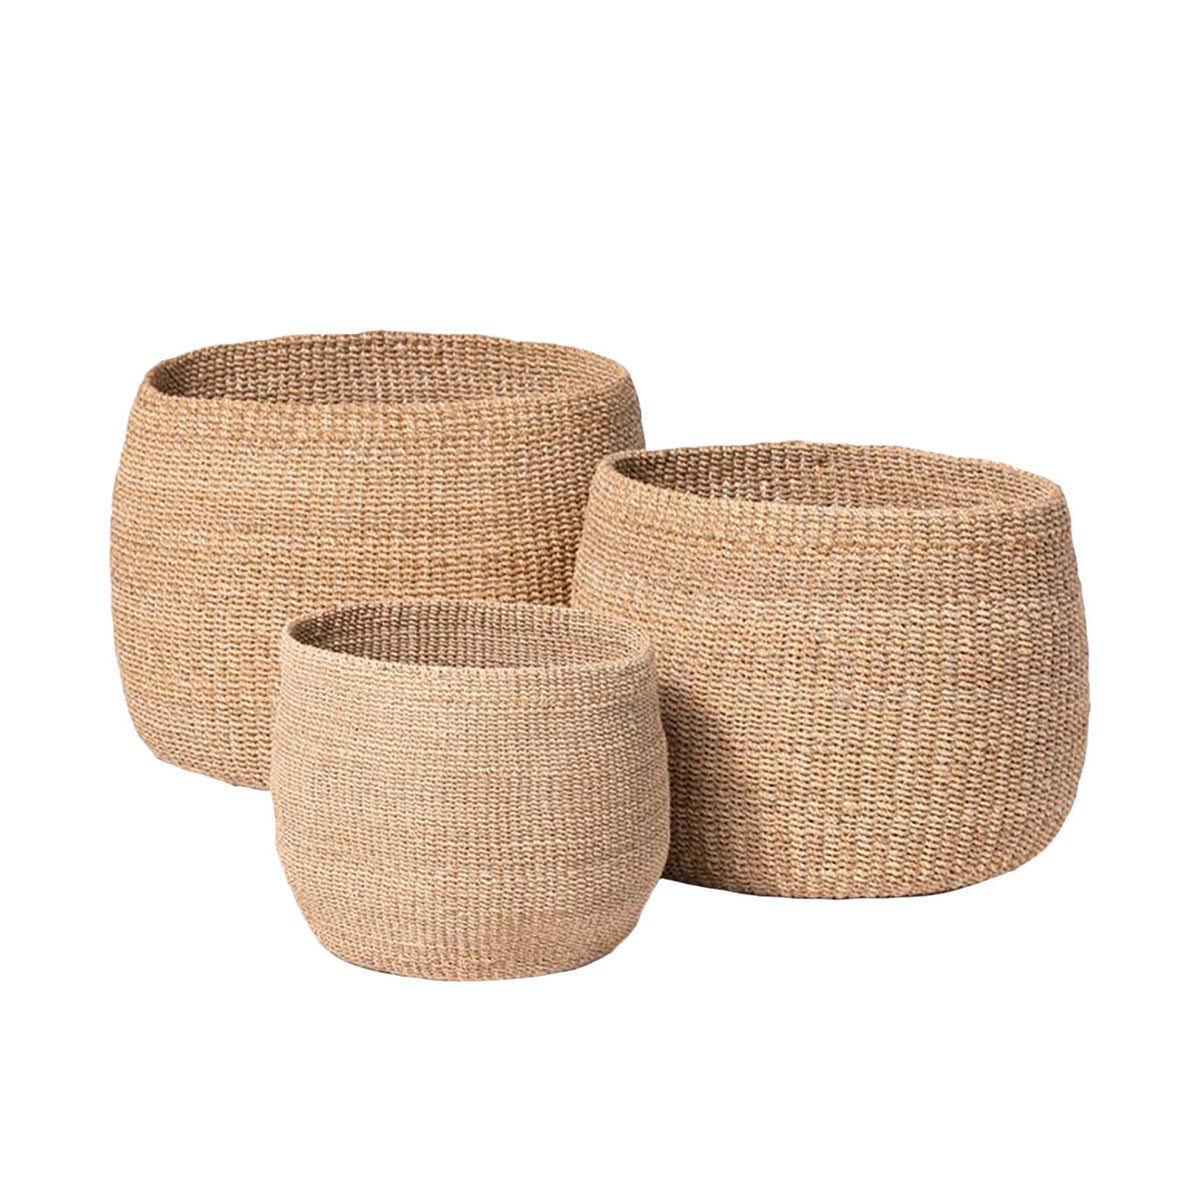 Woven Abaca Tapered Storage Basket, Small